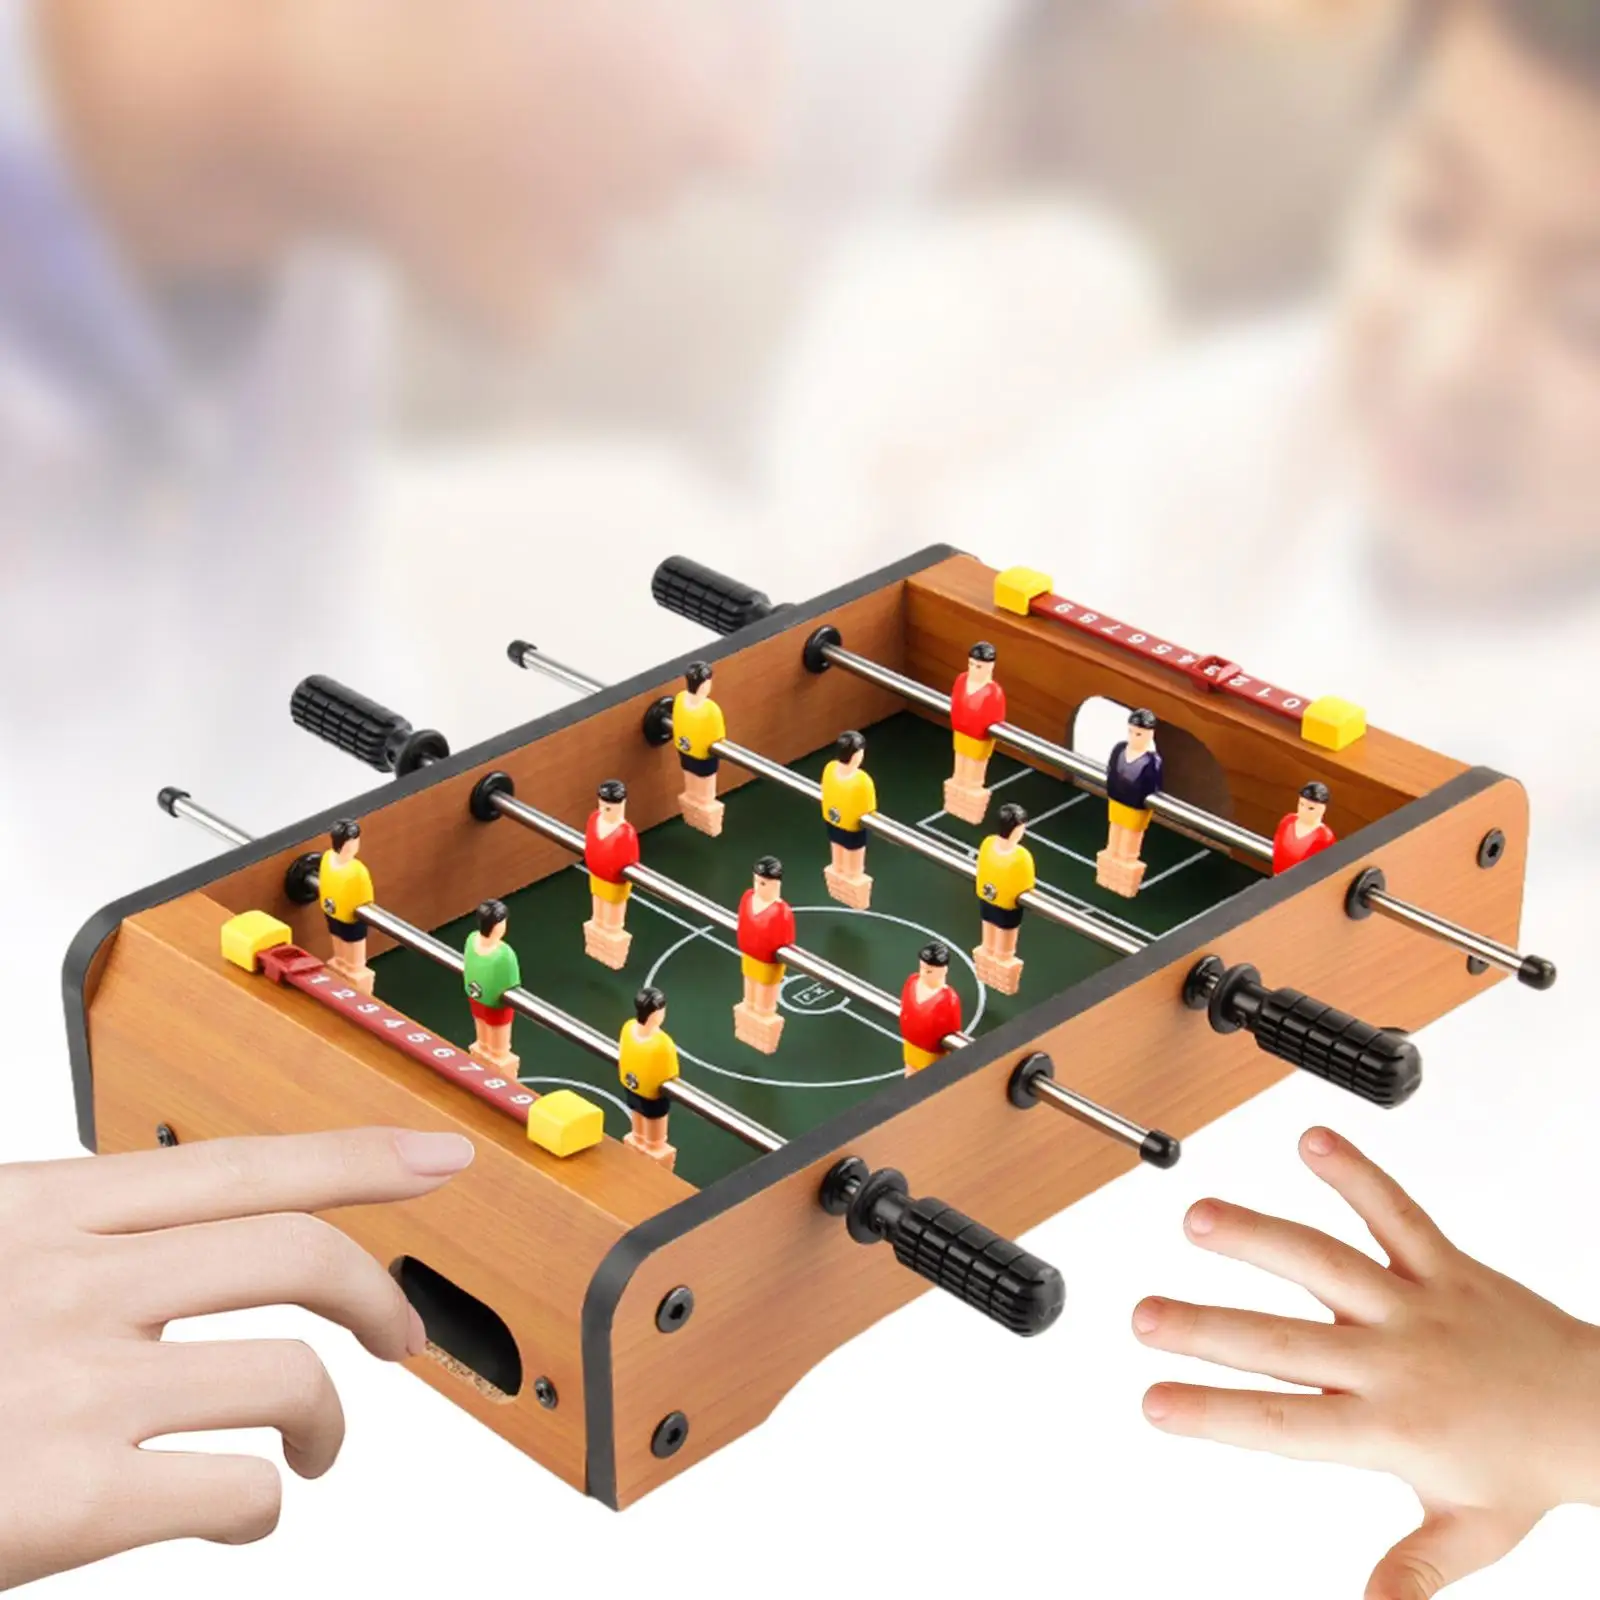 Compact Mini Tabletop Soccer Game, Tabletop Foosball Table, Portable Recreational Hand Soccer